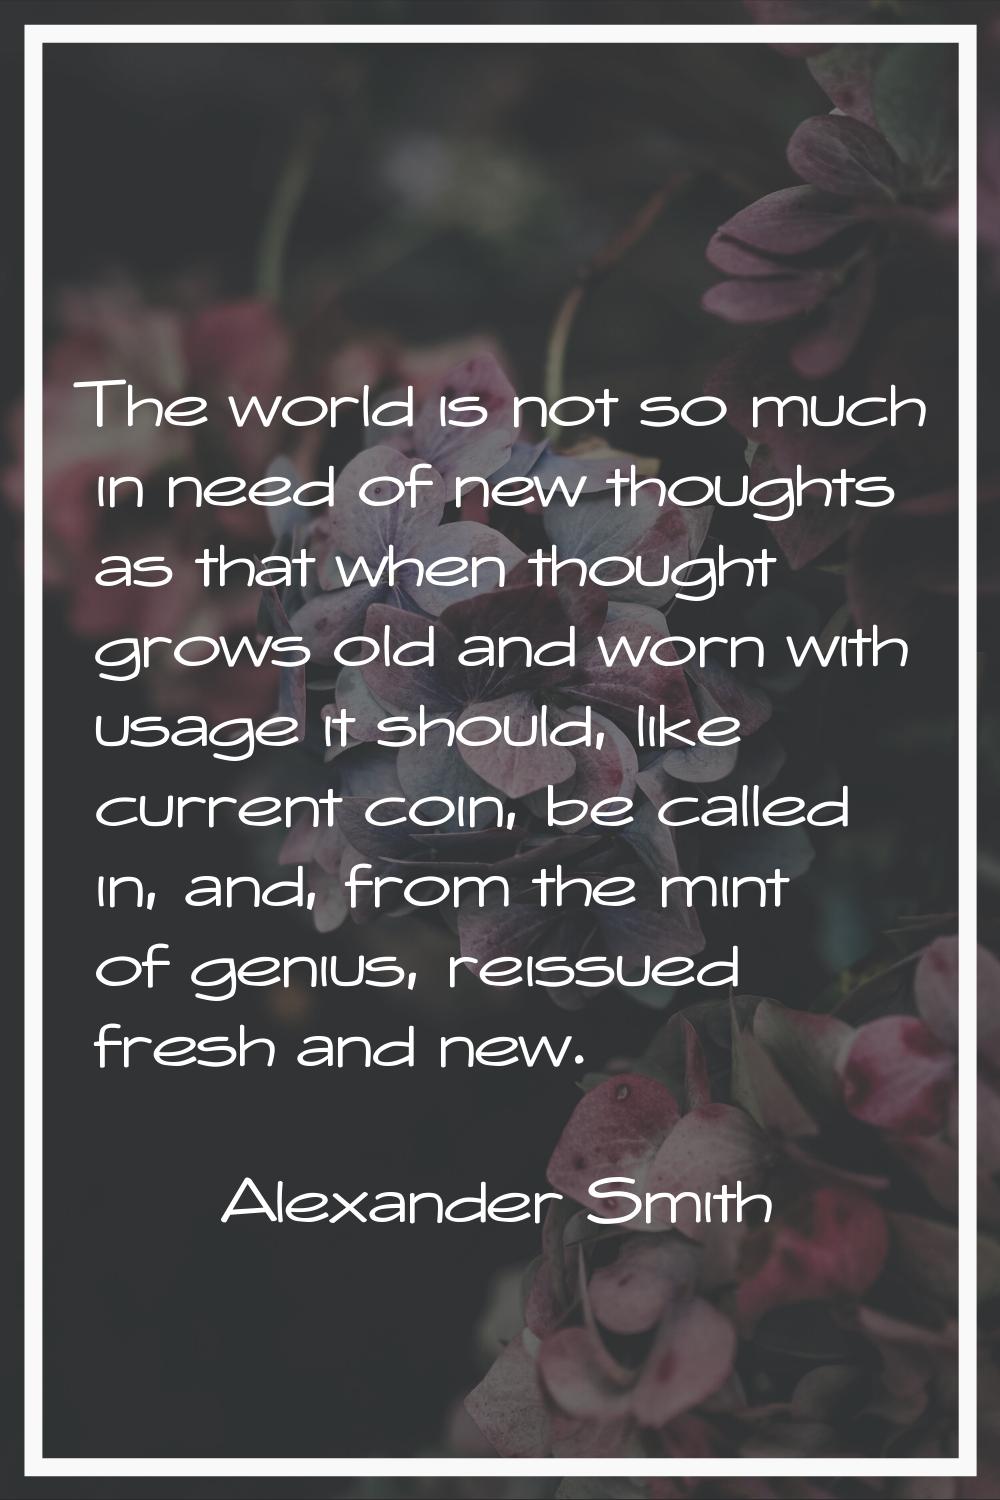 The world is not so much in need of new thoughts as that when thought grows old and worn with usage